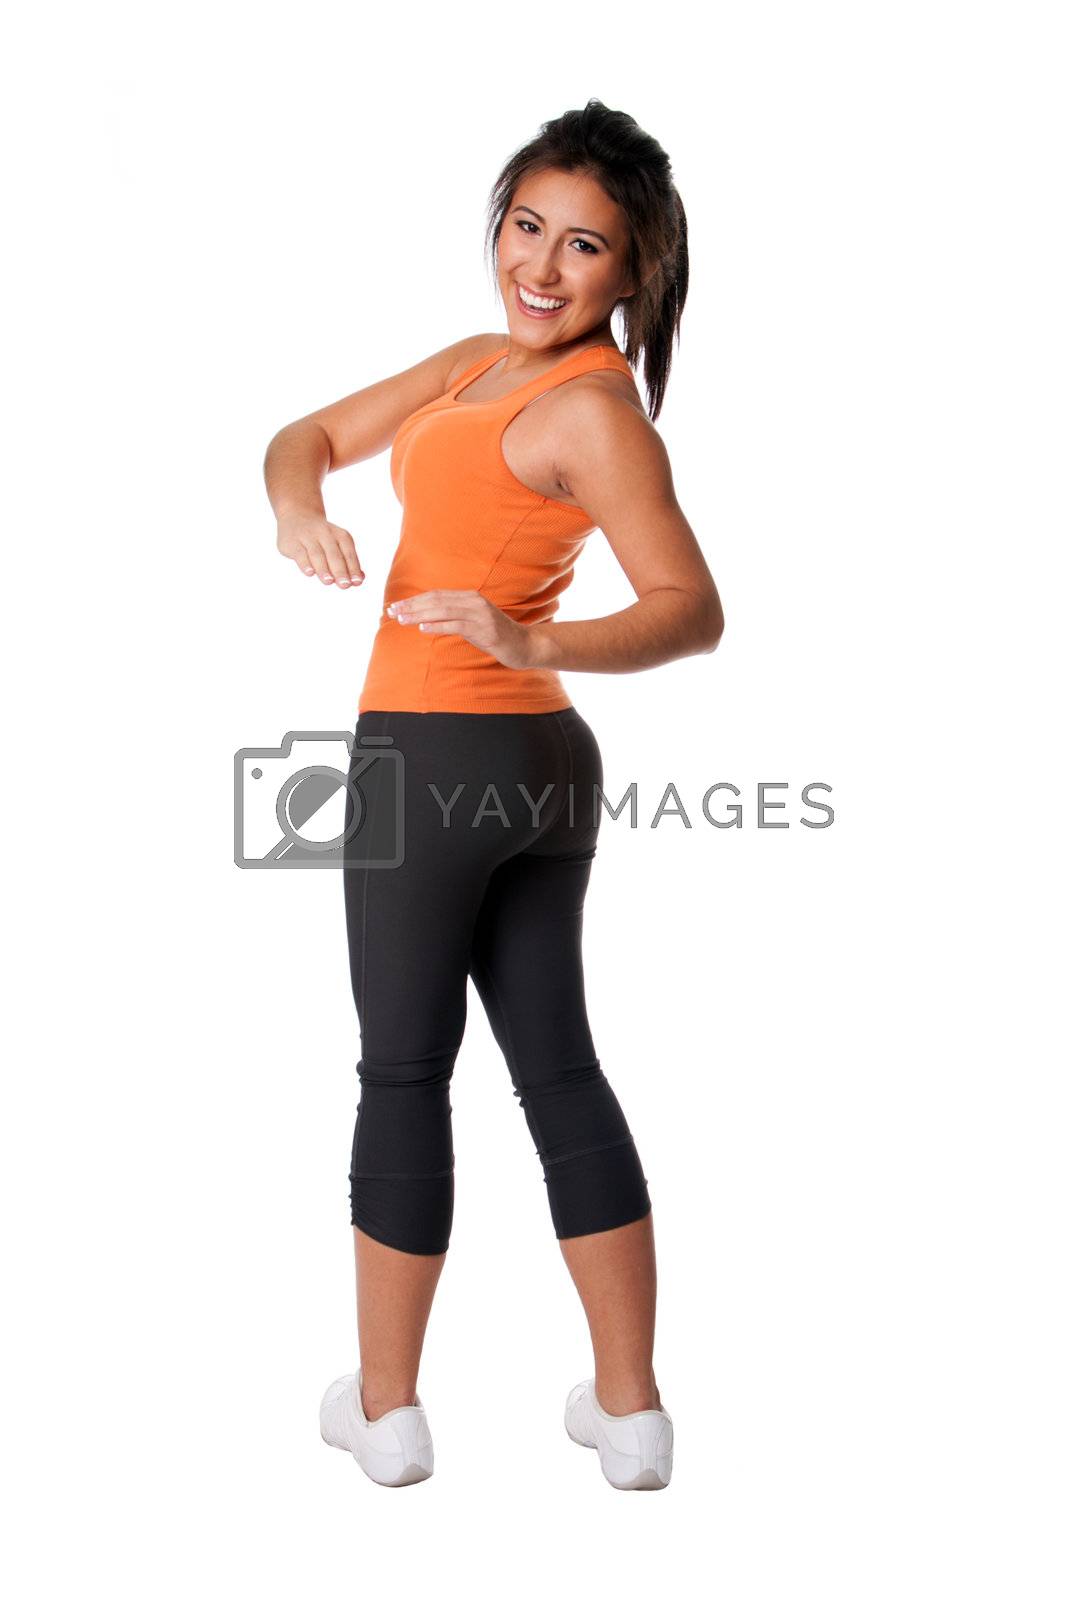 Royalty free image of Fitness exercise by phakimata